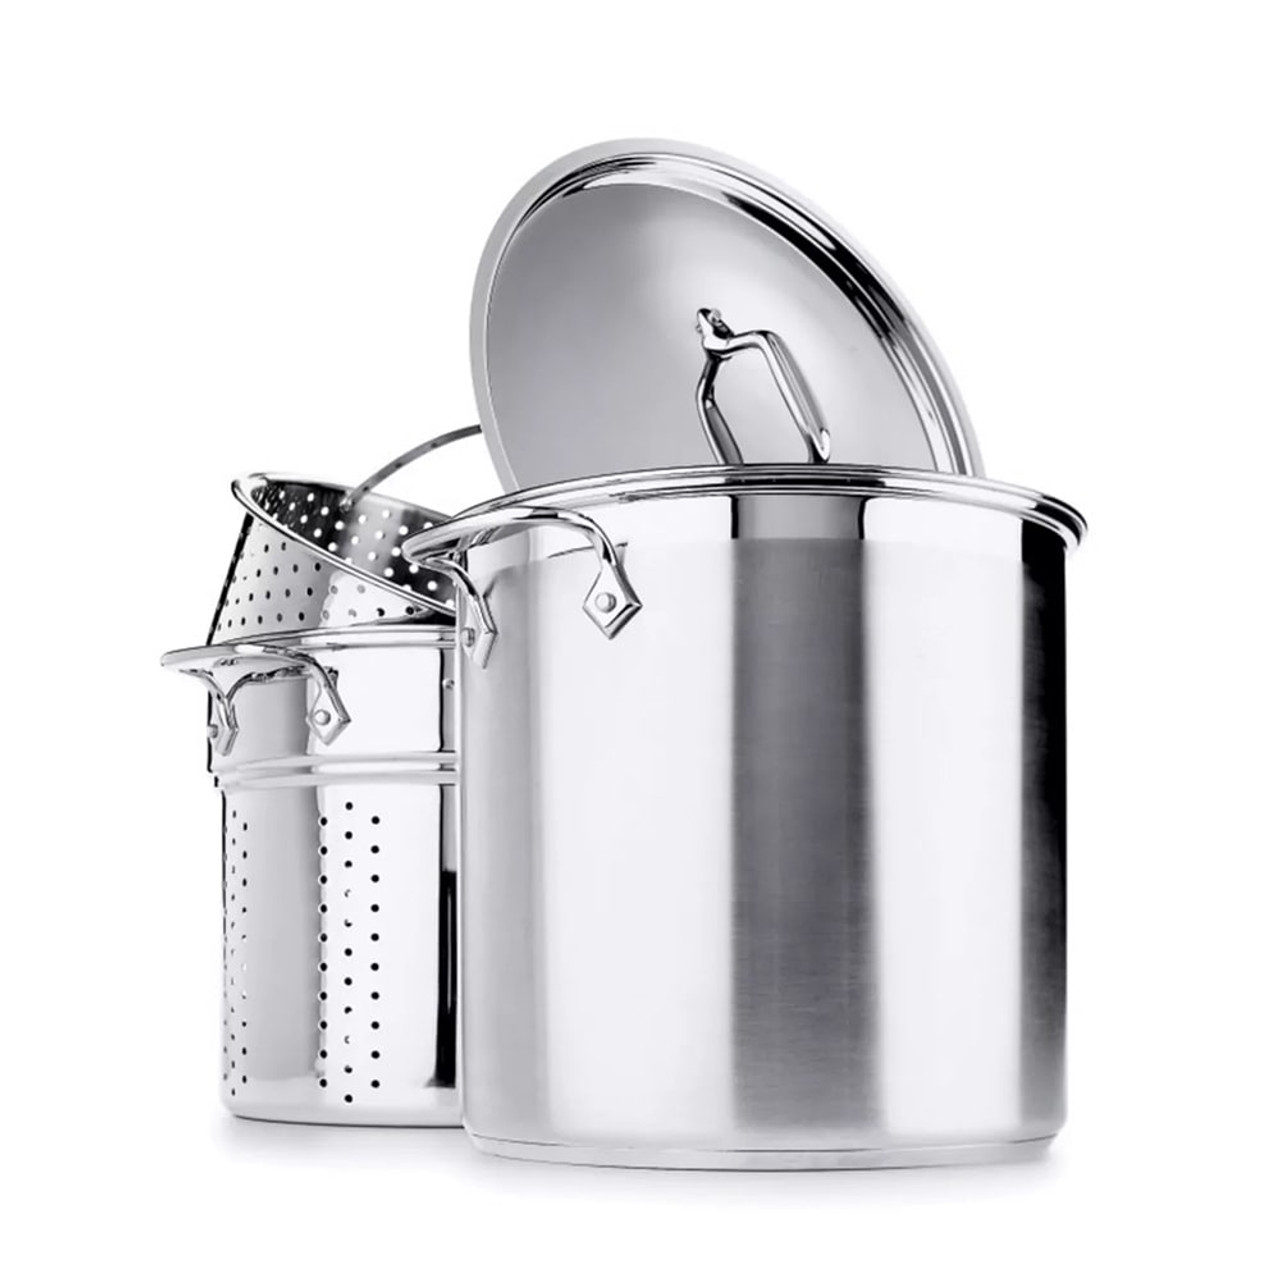 https://cdn11.bigcommerce.com/s-hccytny0od/images/stencil/1280x1280/products/3248/11574/all-clad-stainless-steel-multi-pot__90873.1586696372.jpg?c=2?imbypass=on